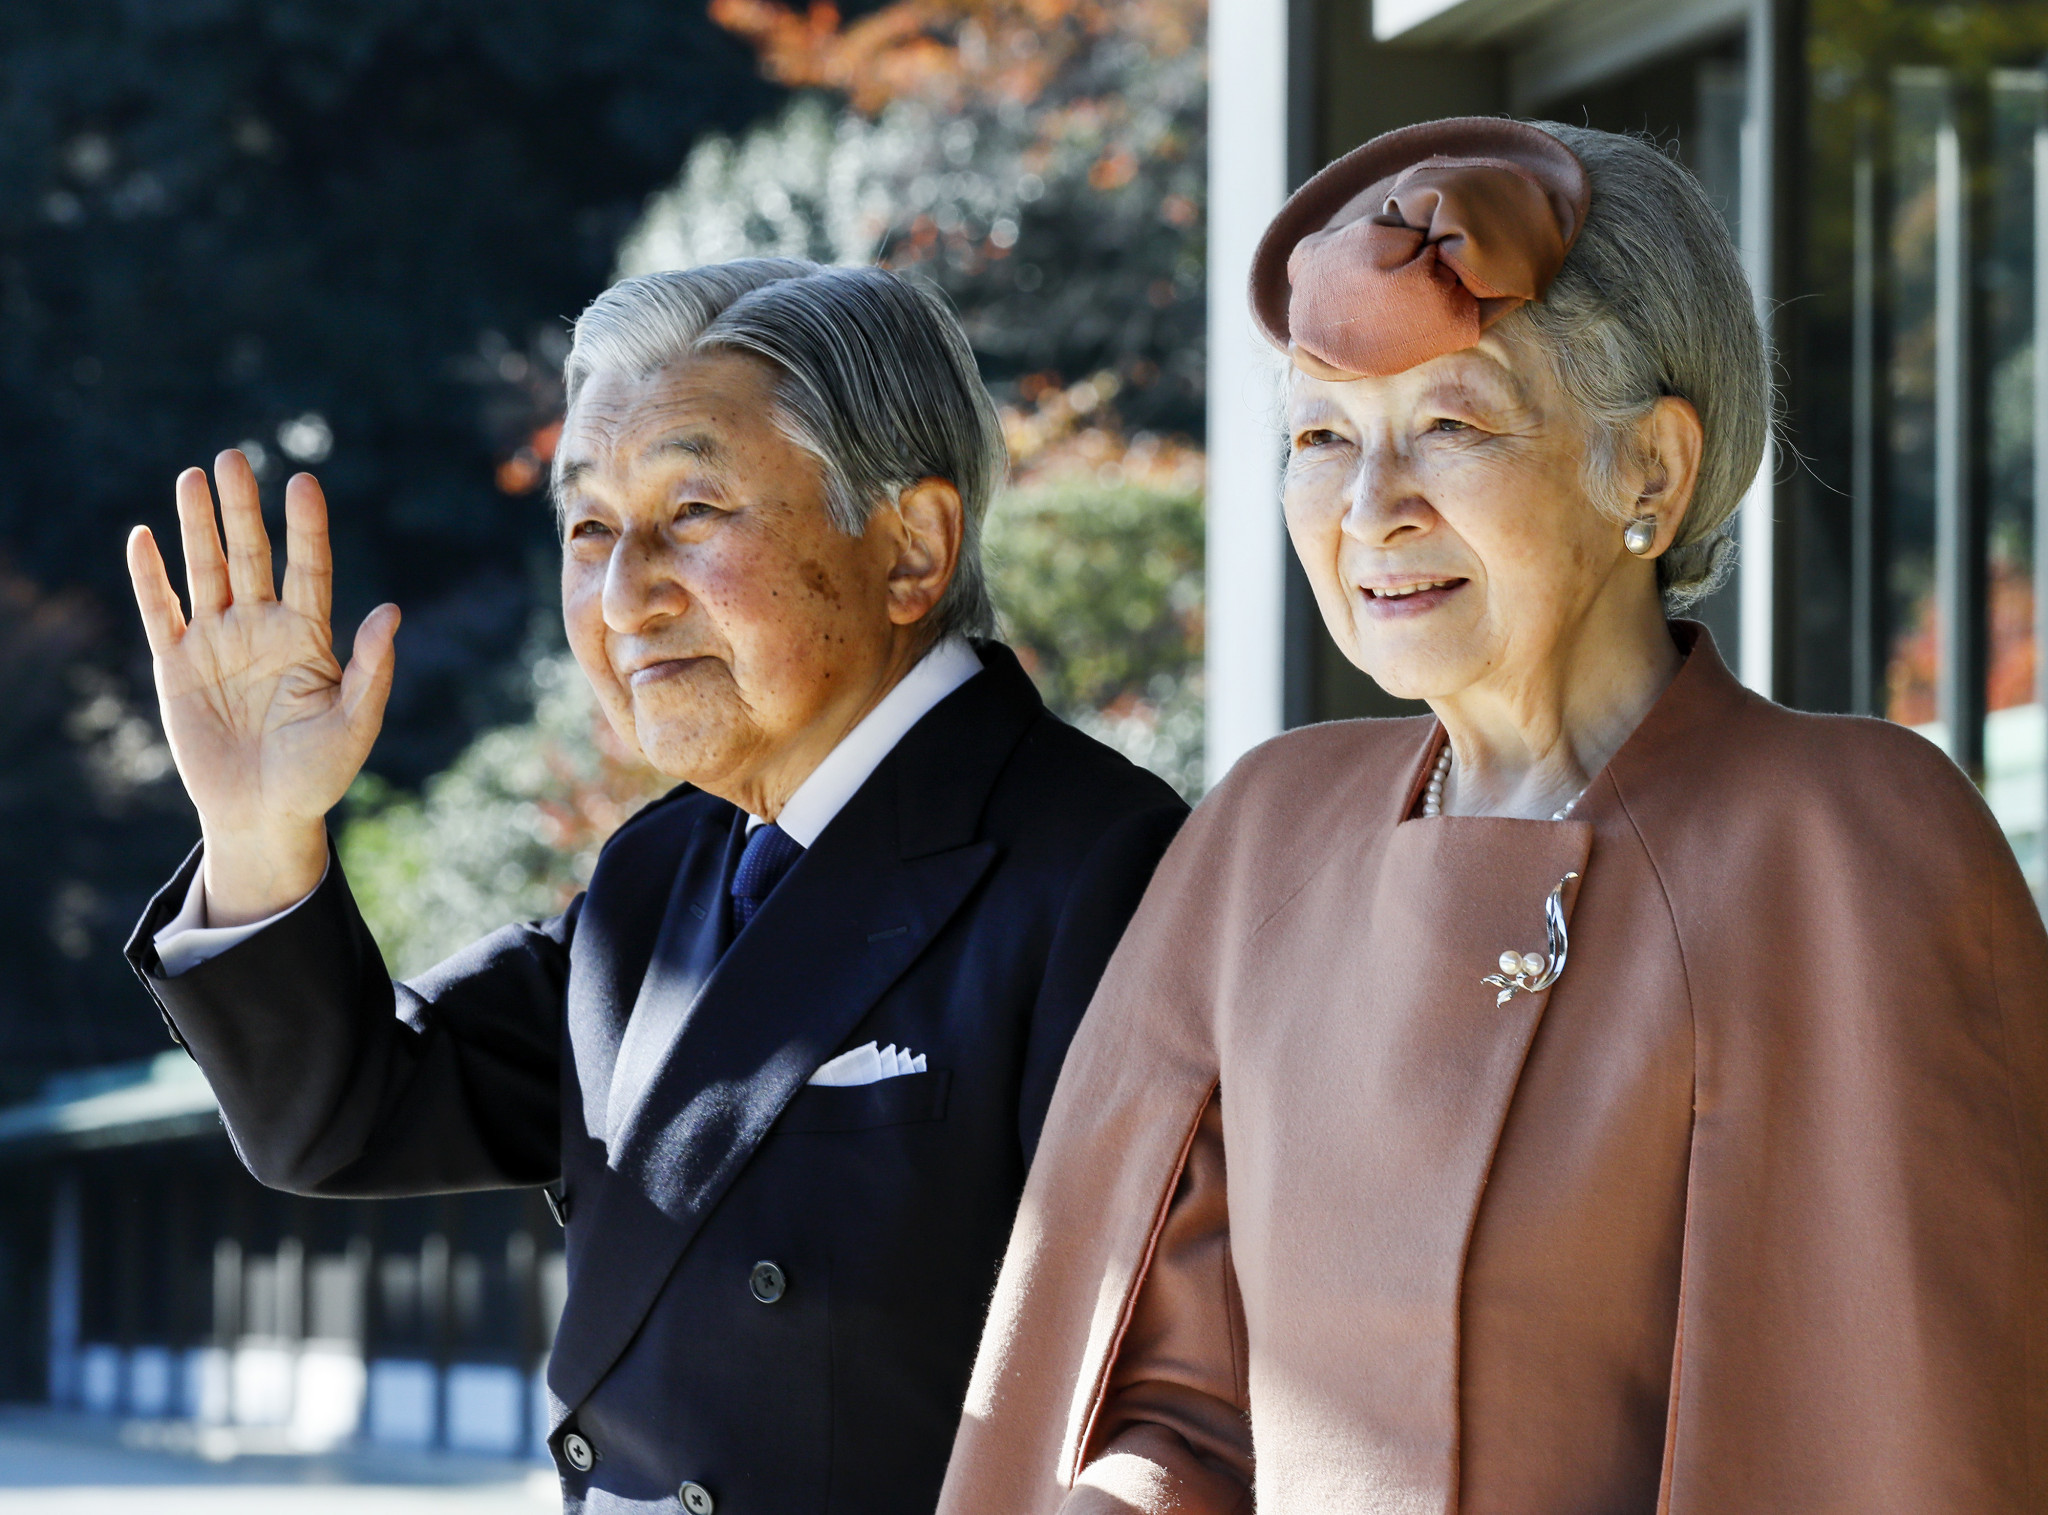 Emperor's abdication means heir will open Tokyo 2020